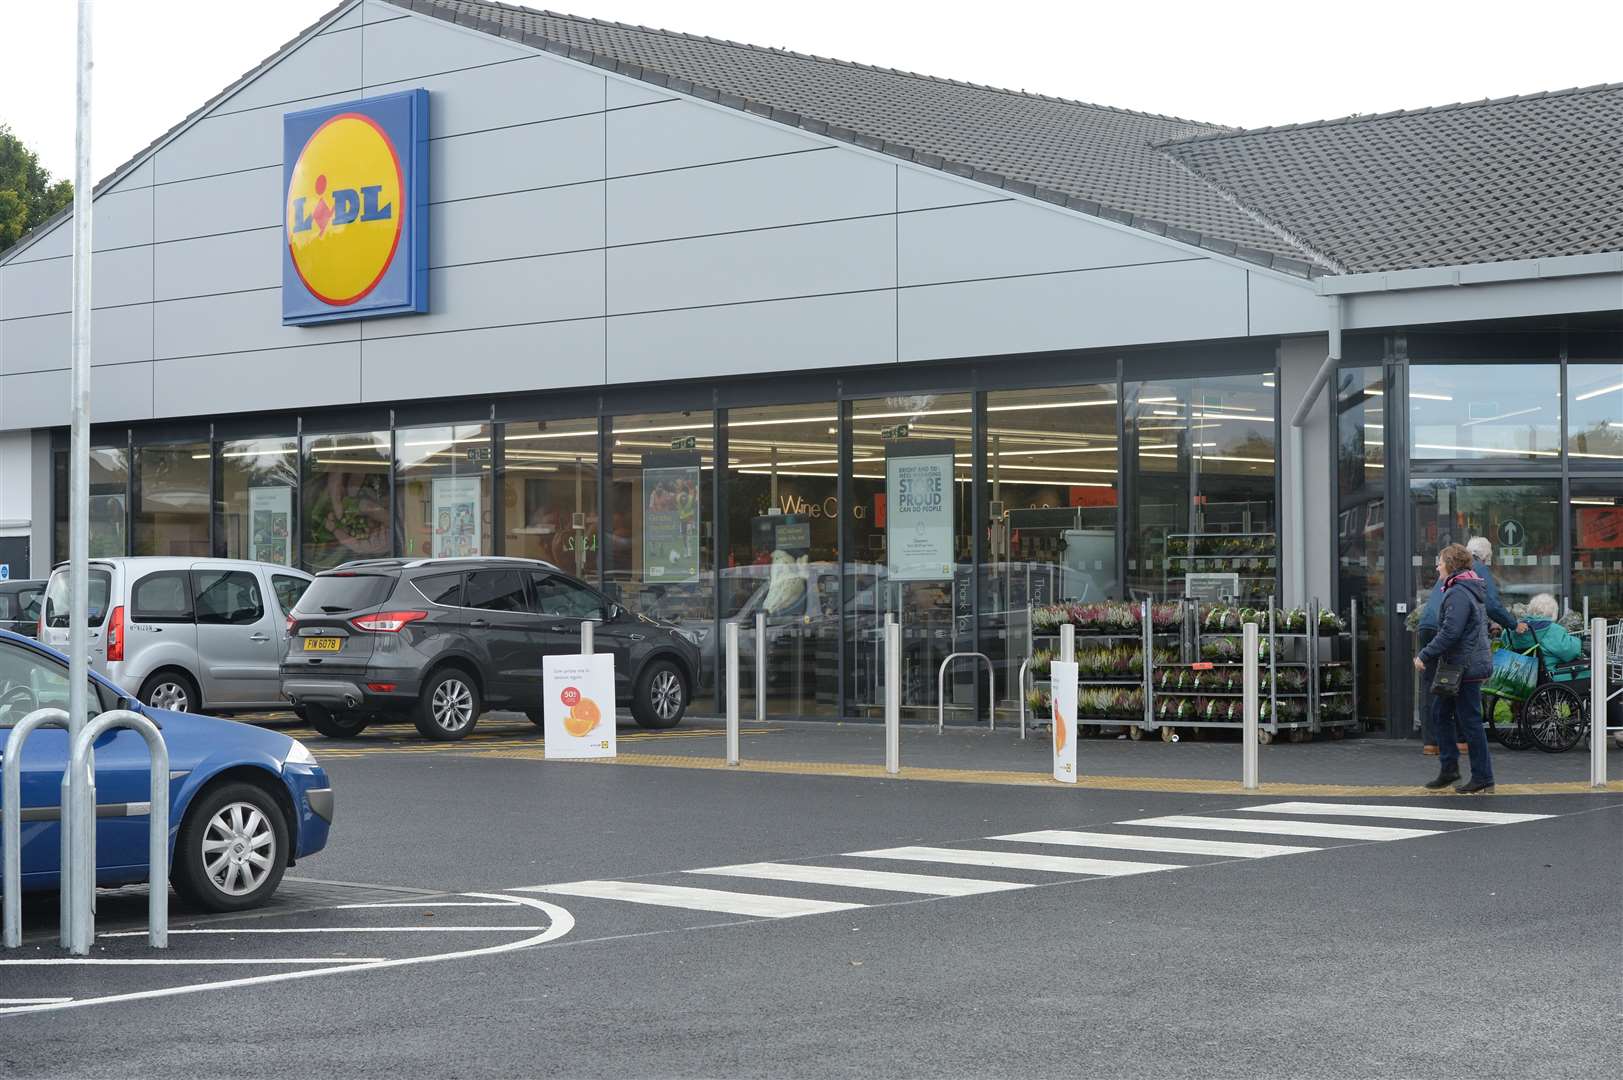 Supermarket chain Lidl has announced plans for a second Inverness store.